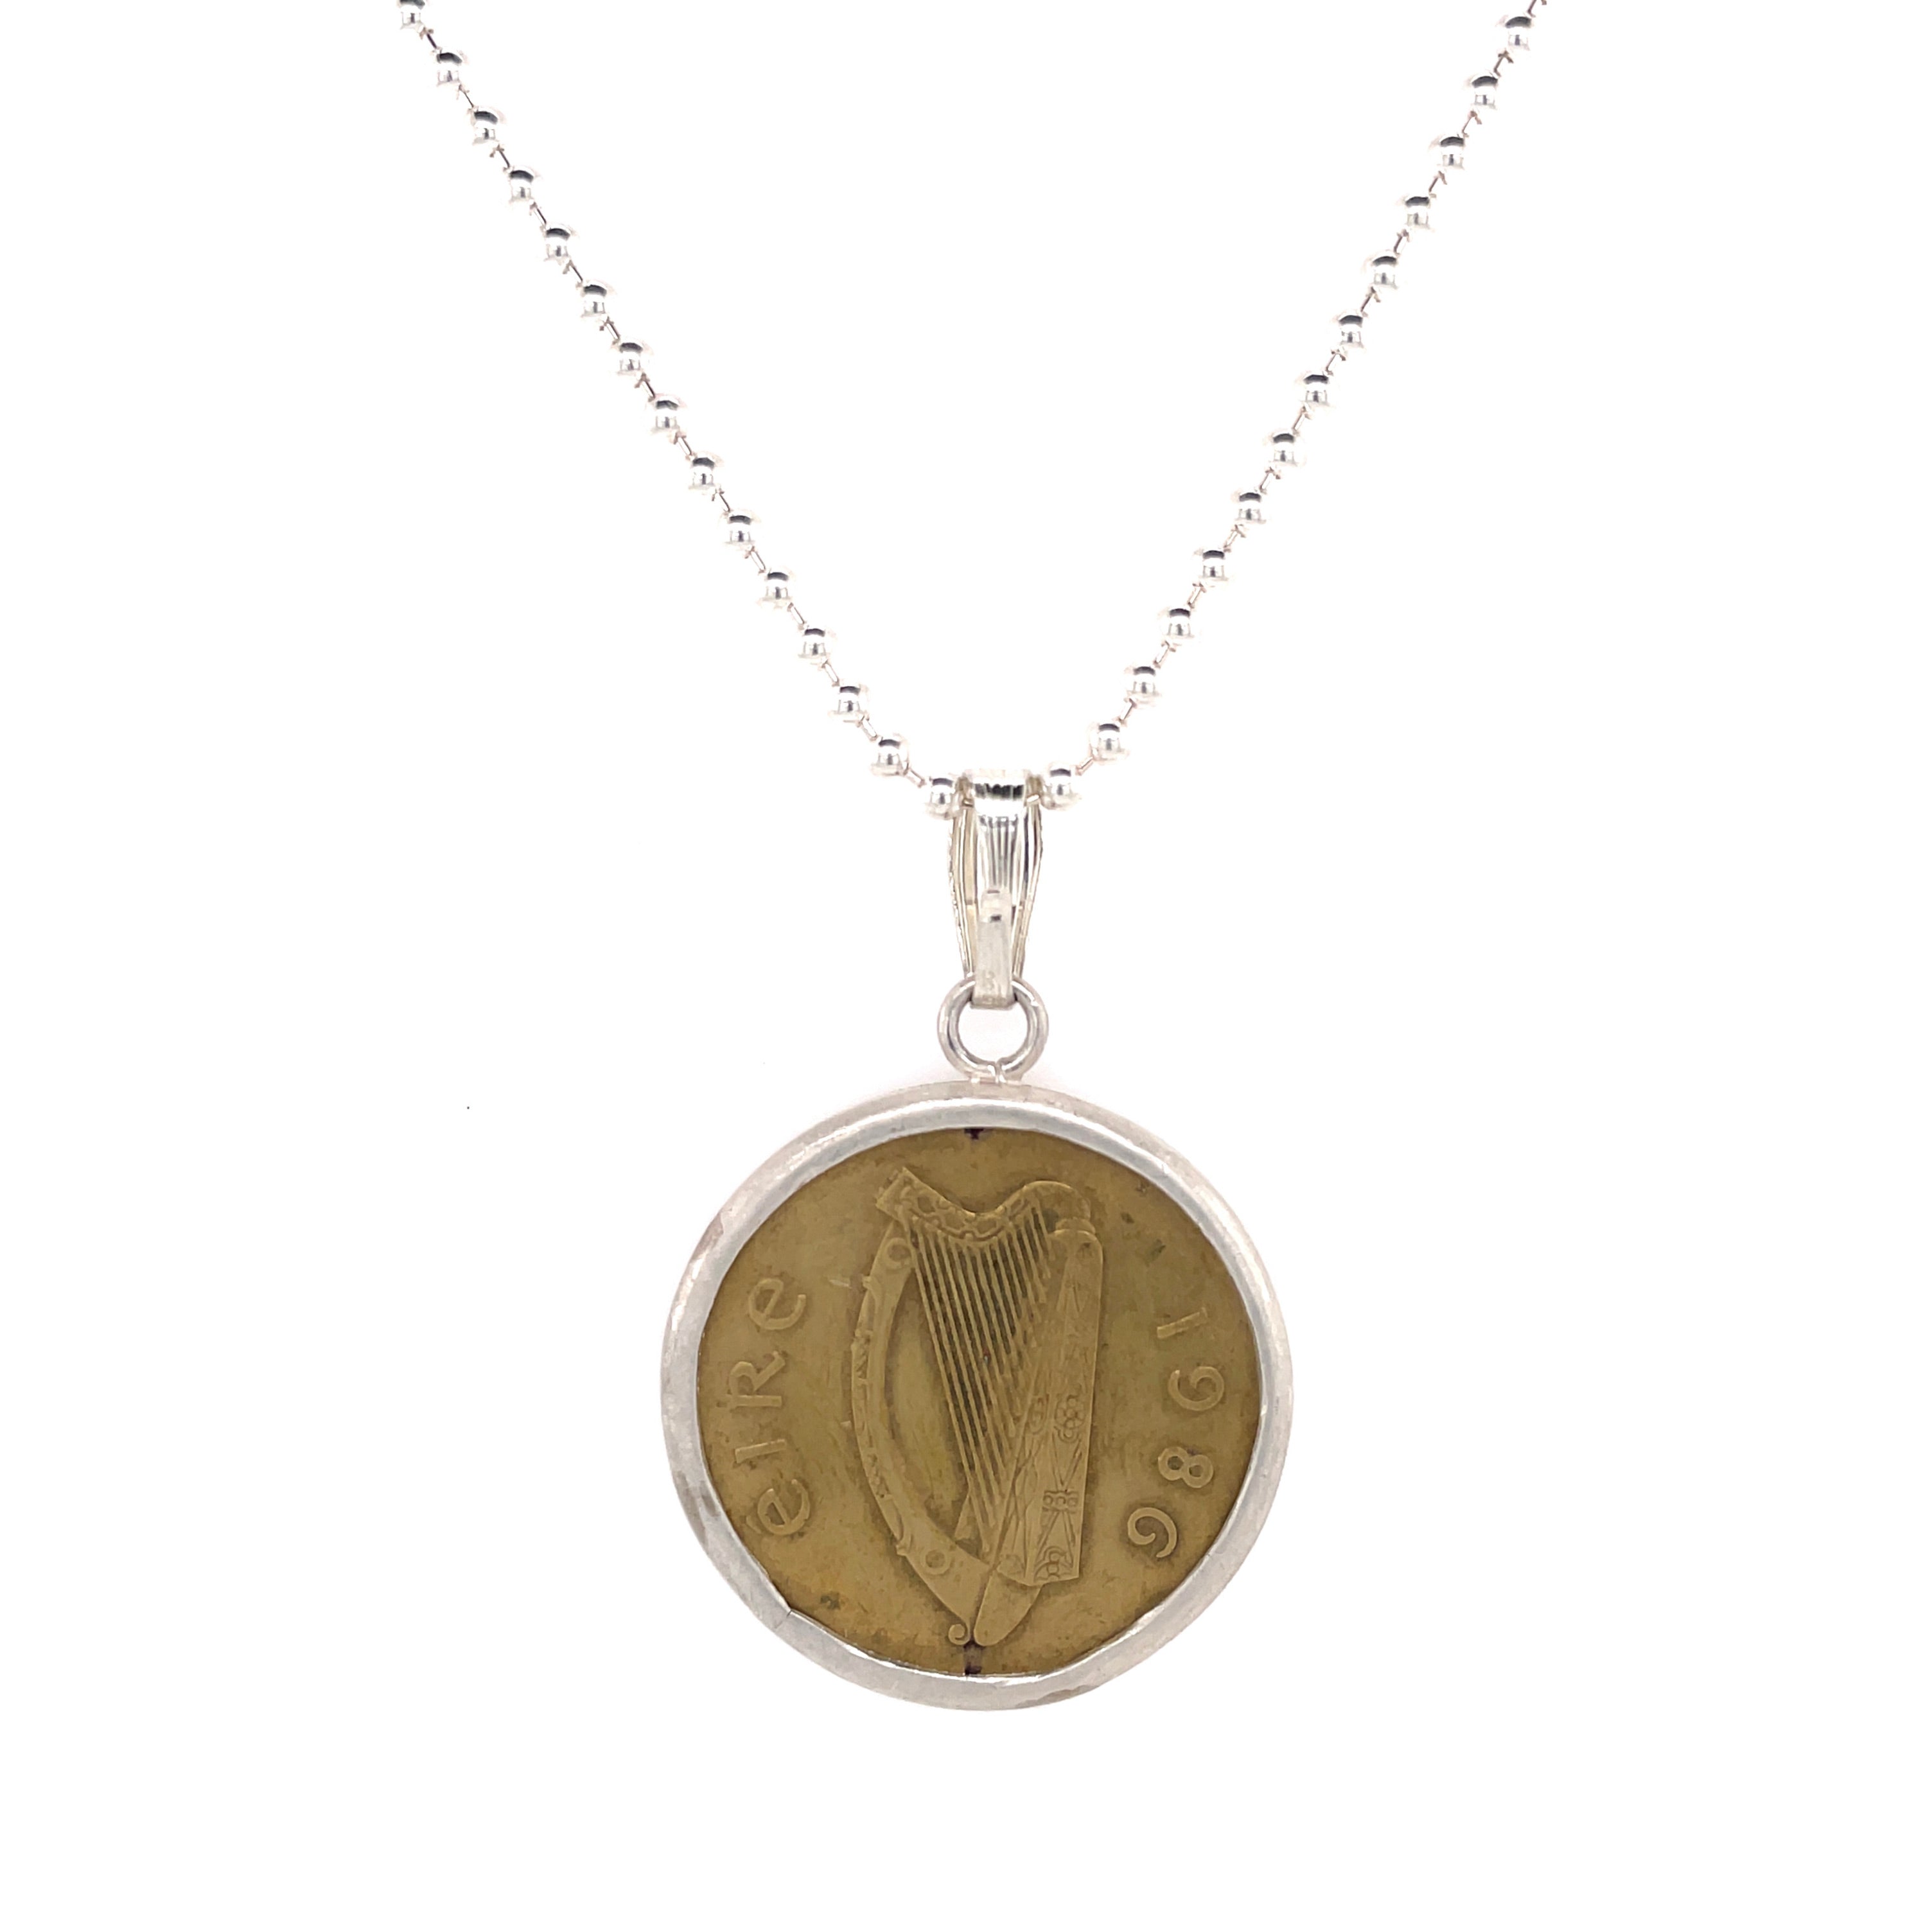 Irish coin necklace with silver setting